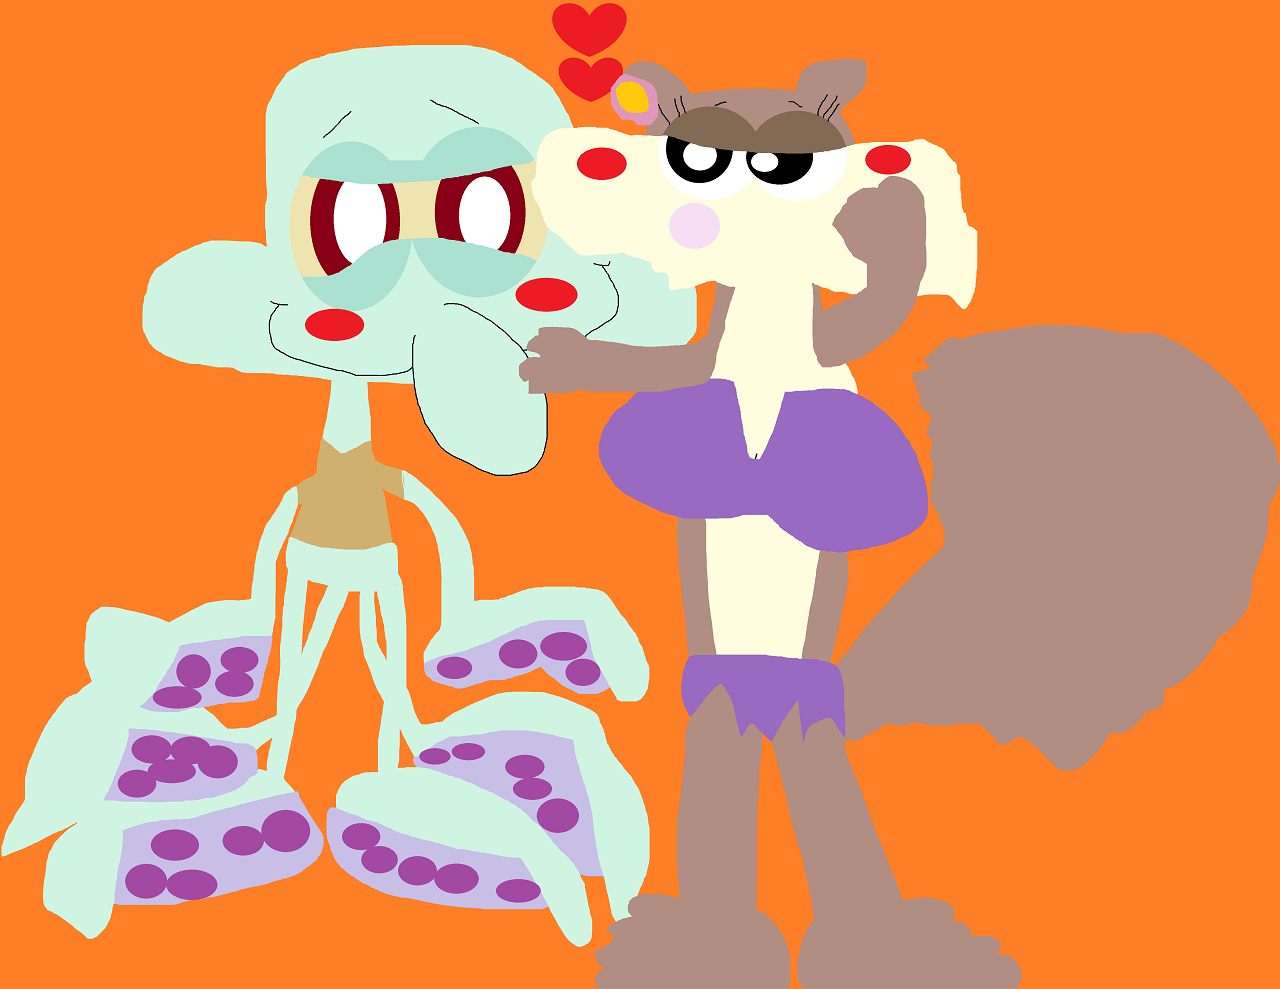 Just Another Sandy Kissing Squidward's Cheek by Falconlobo